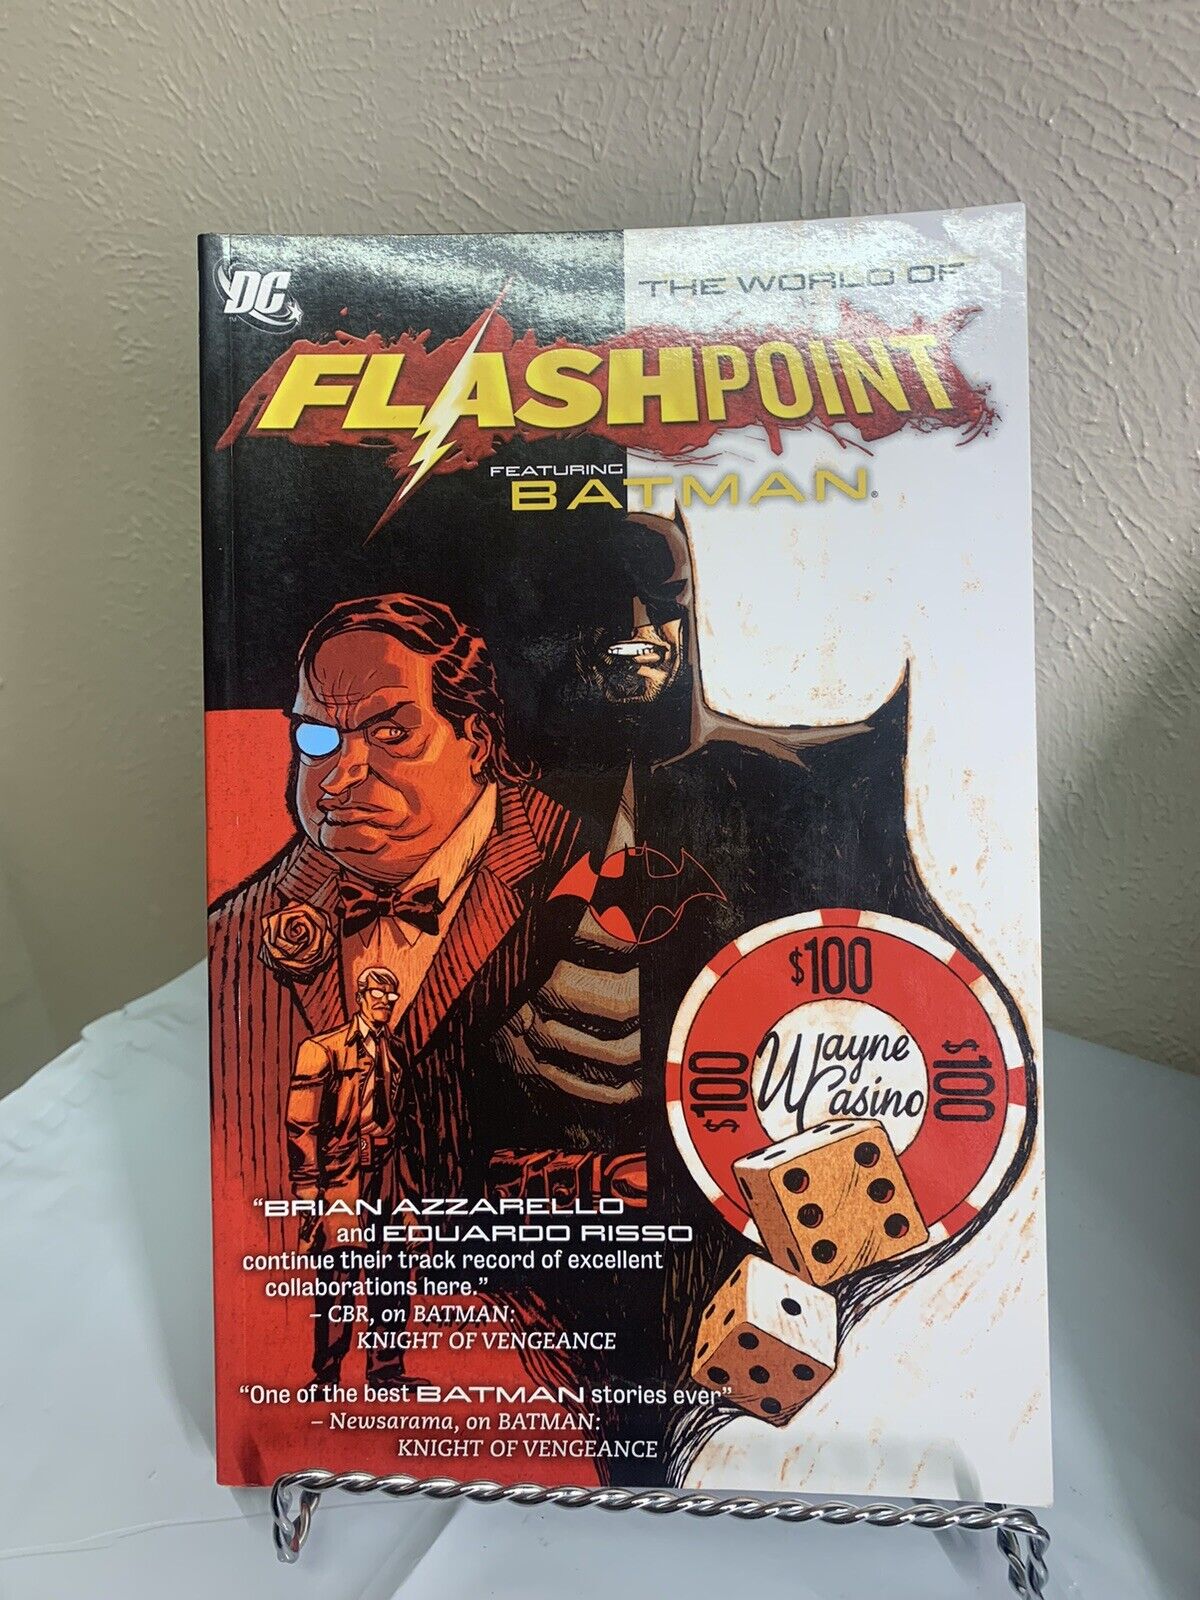 Flashpoint: The World Of Flashpoint Featuring Batman TPB